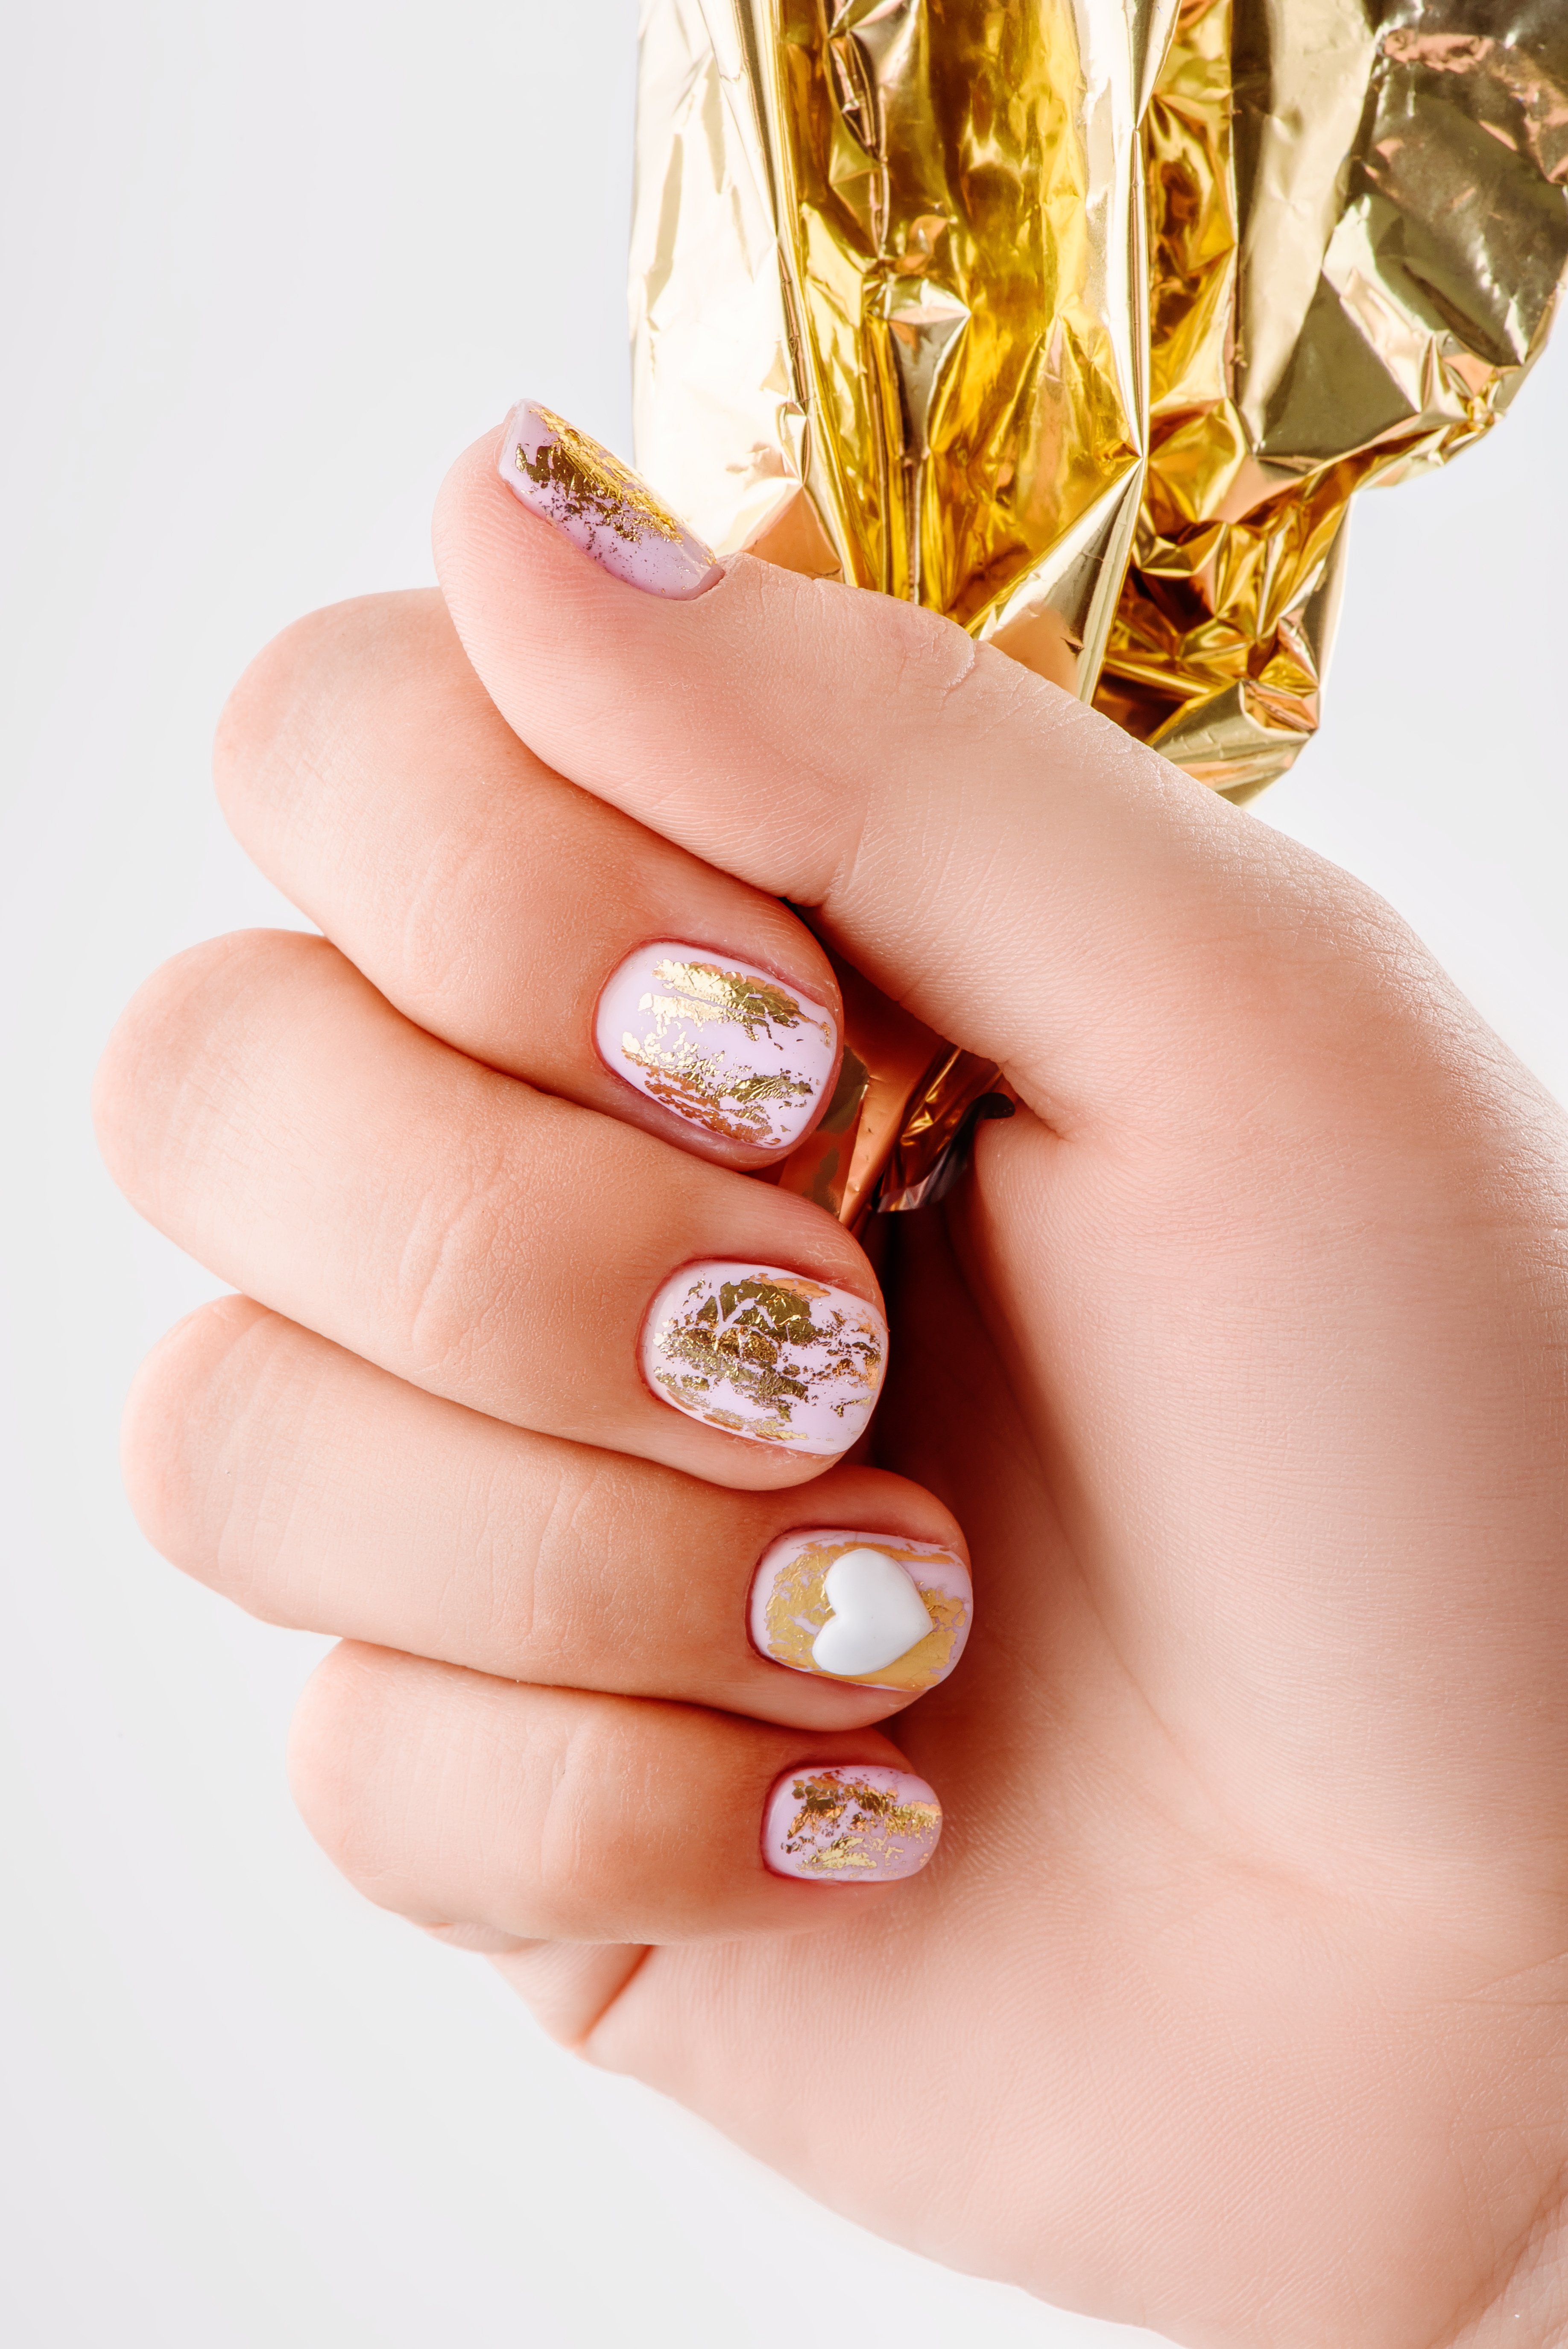 Manicured wide nails with gold nail art | Source: Shutterstock